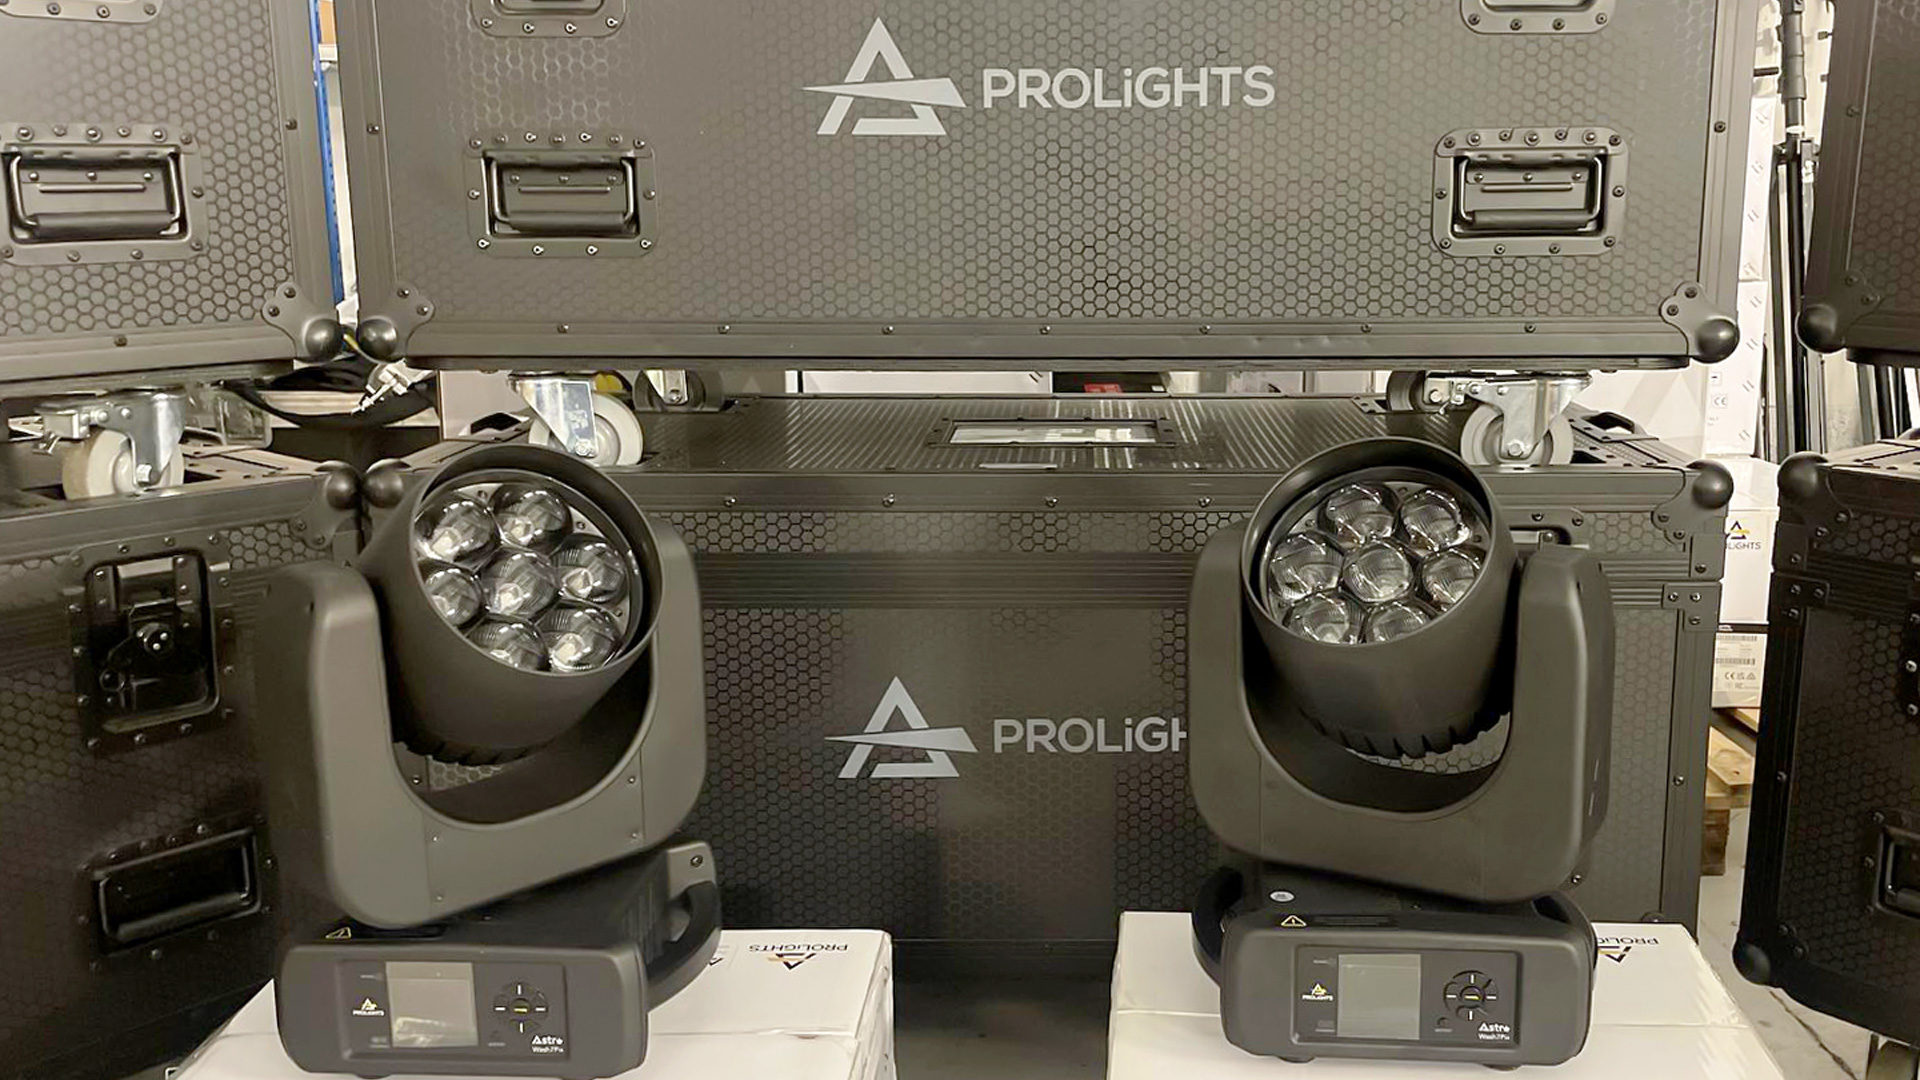 Lysdesign AS invests in PROLIGHTS